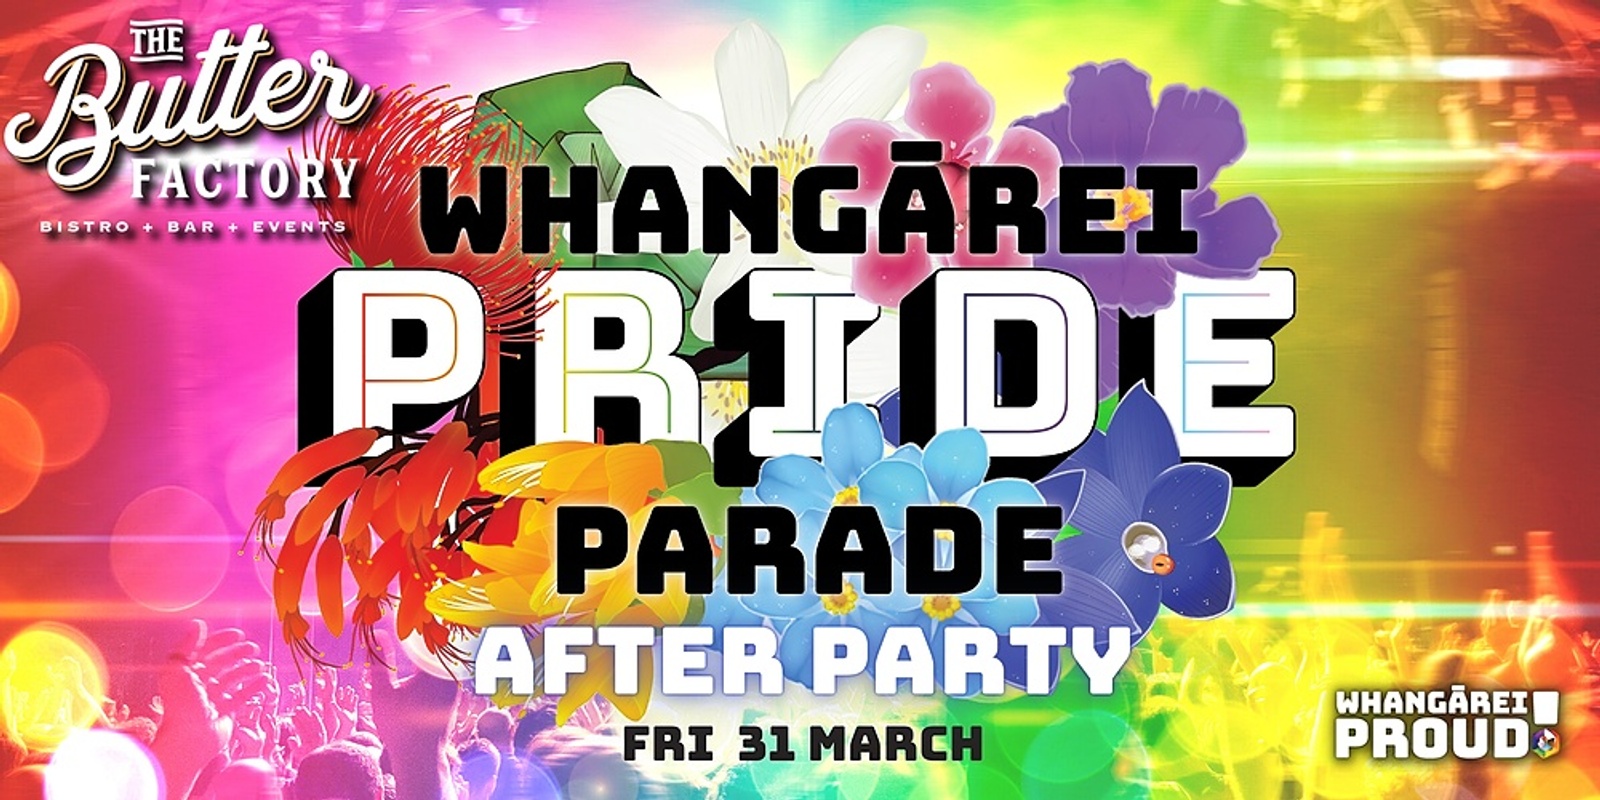 Whangarei Pride Parade After Party!